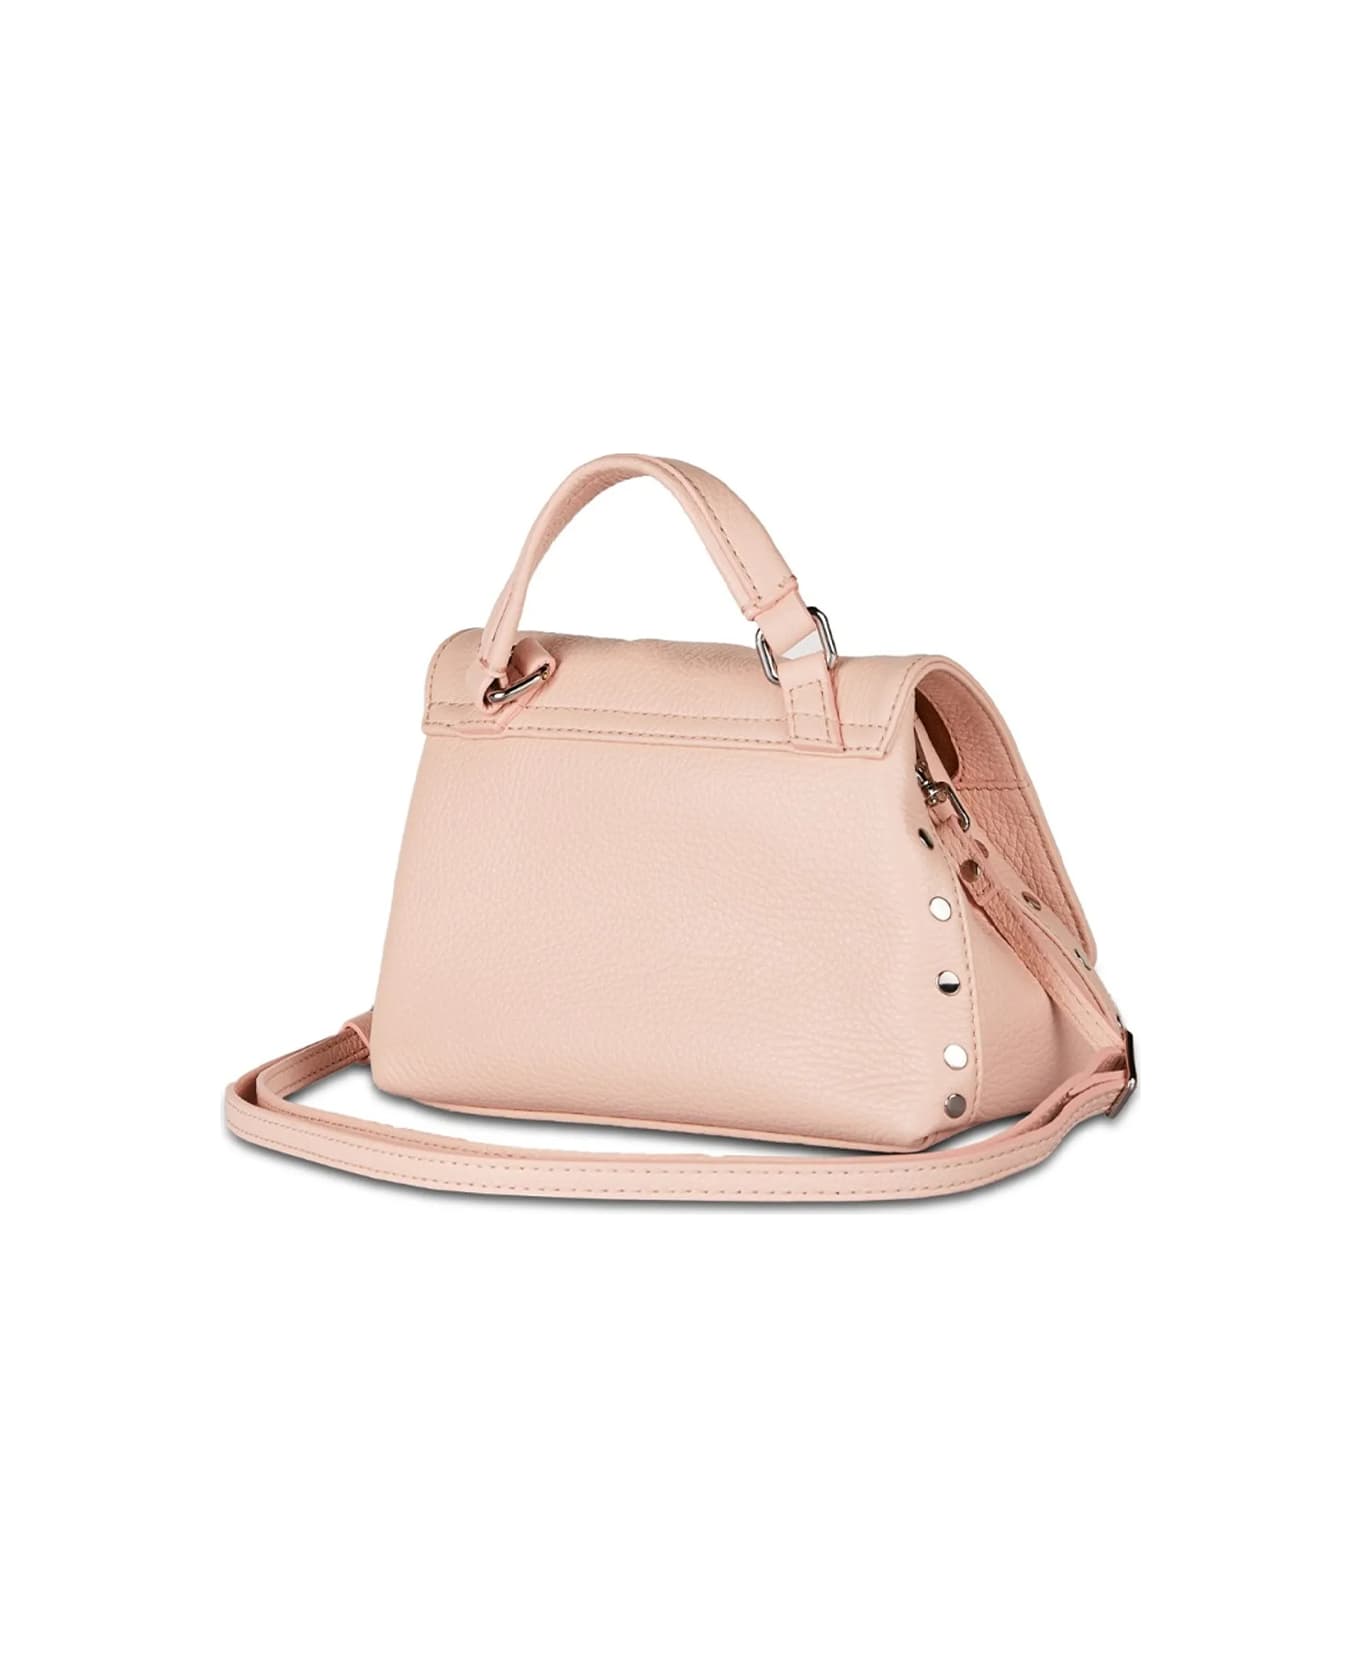 Zanellato Postina Daily Pink Leather Bag With Shoulder Strap - ROSA COCOON